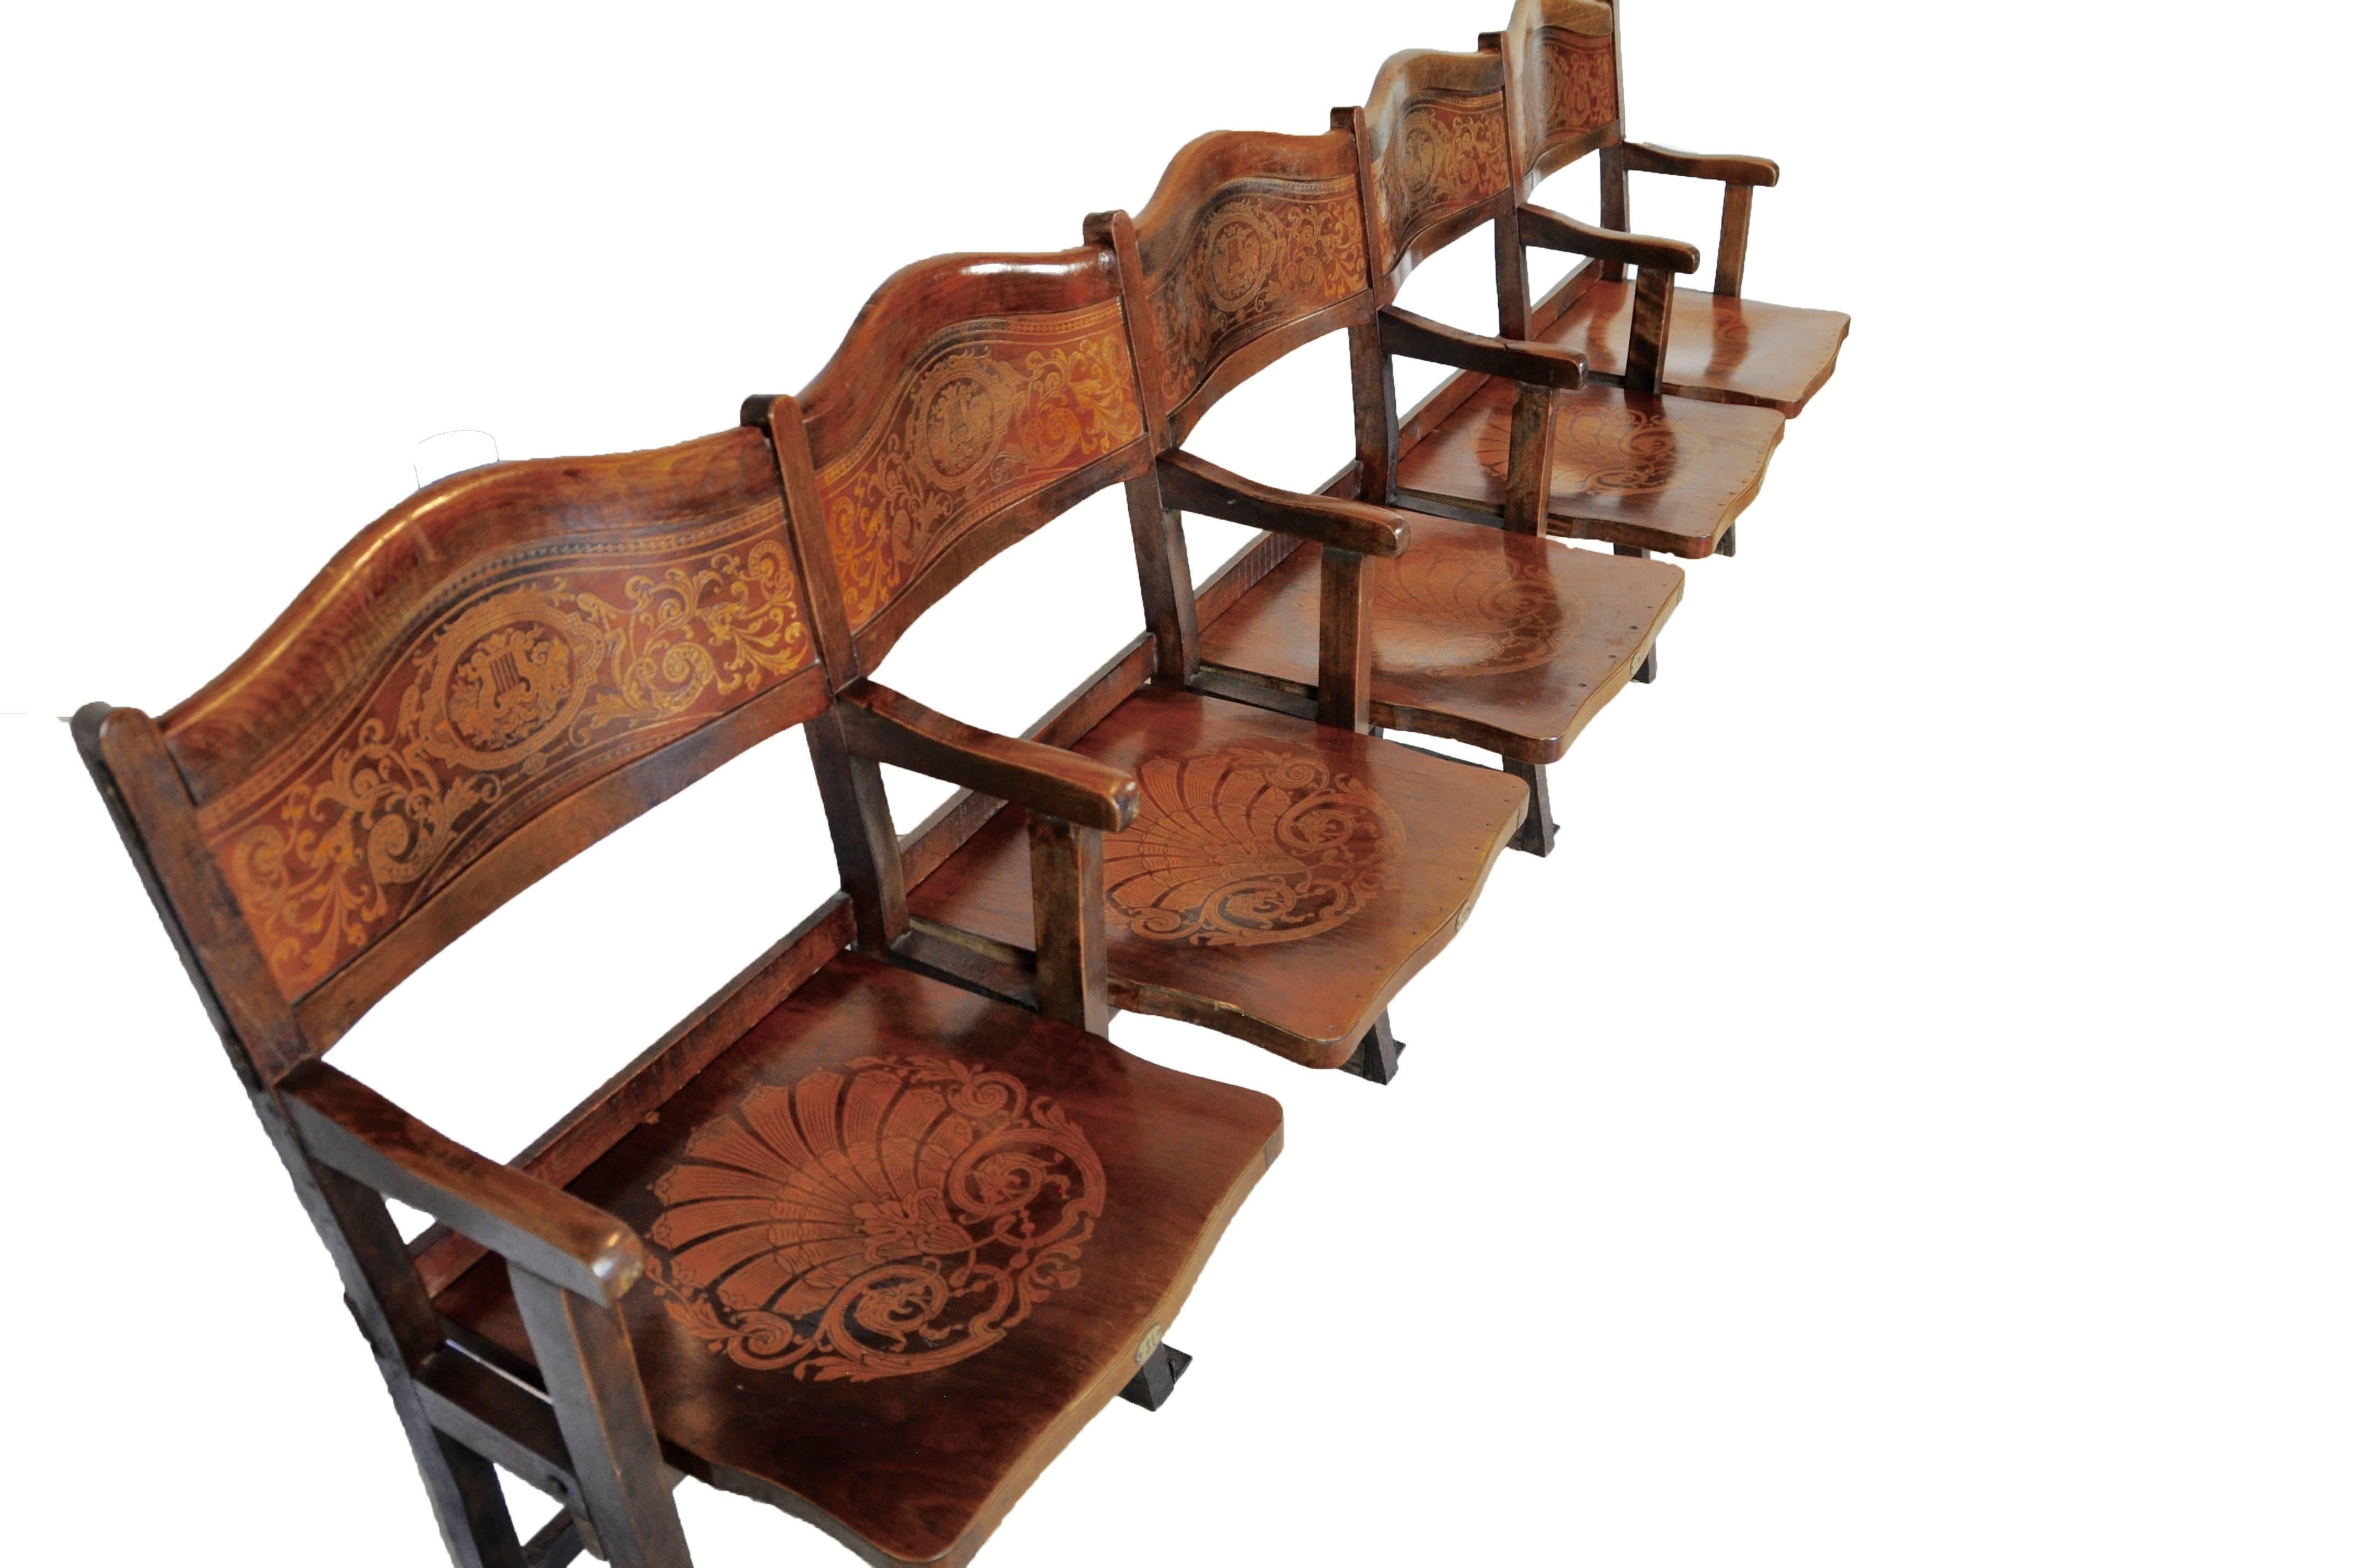 The rosewood and maple marquetry in the back rests and seats of this row of theatre seats from Belgium is exquisite. All five flip down seats are back waited, which brings the seats to their upright position. We have seen many wood theatre seats in